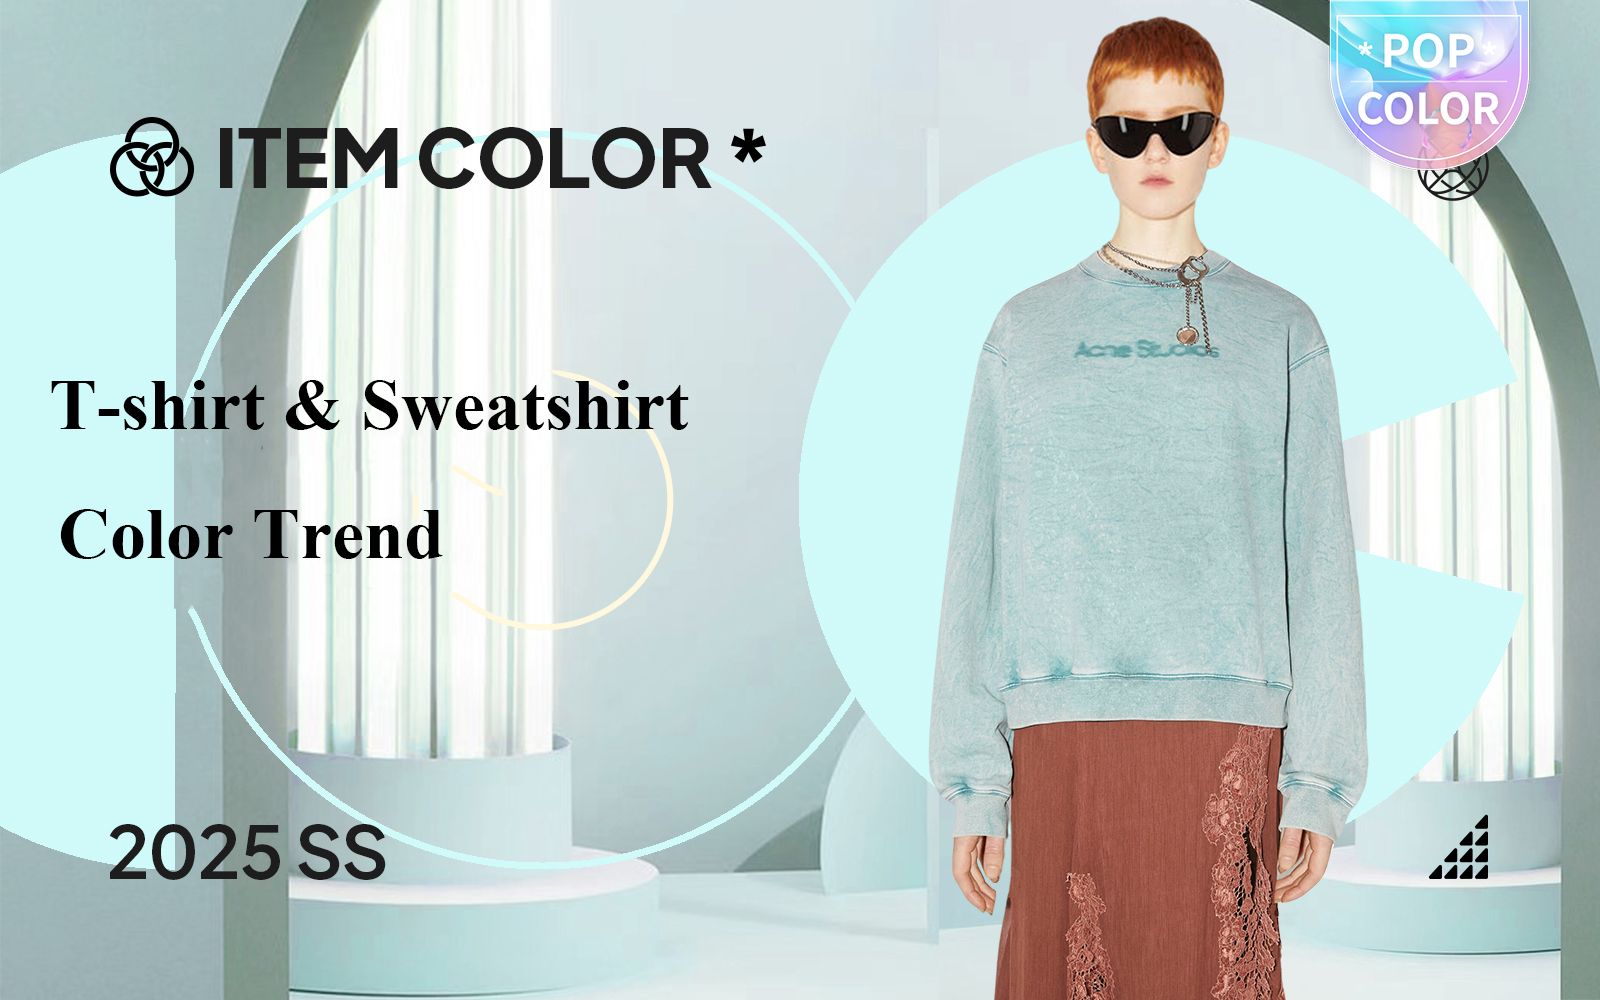 Fresh Summer Vibes -- The Color Trend for Women's T-shirt & Sweatshirt